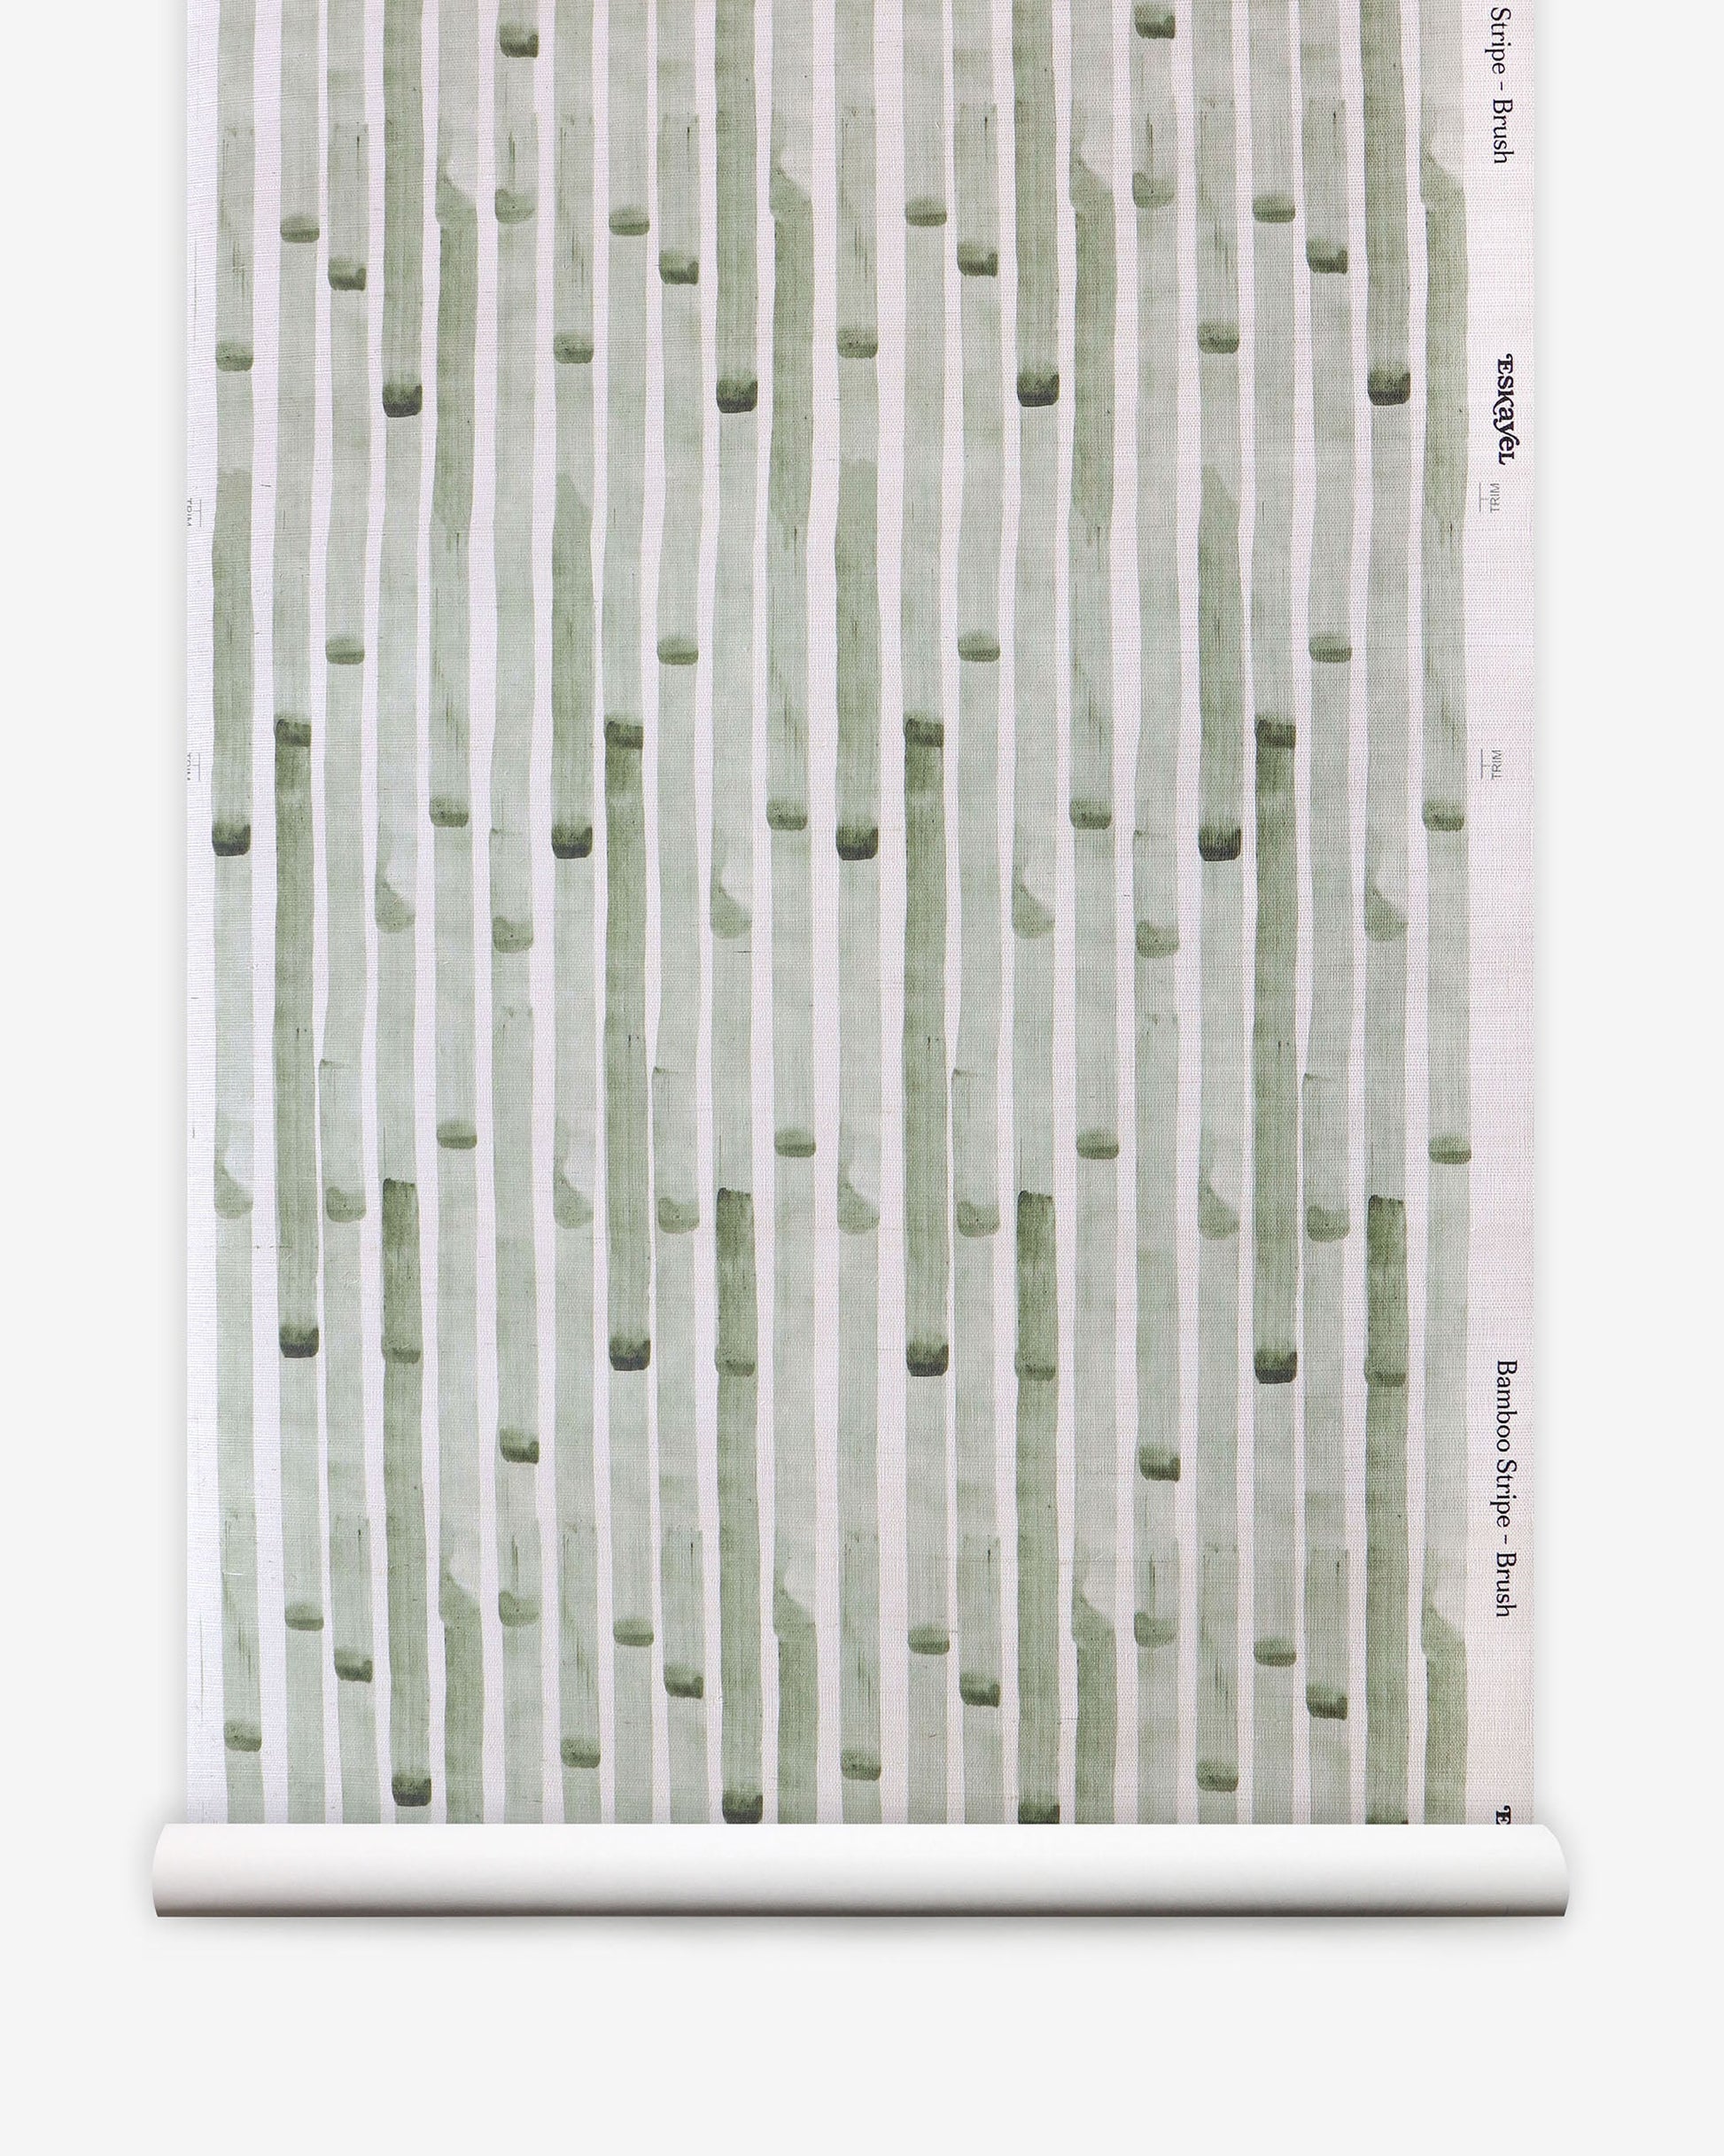 A green and white Bamboo Stripe Grasscloth Brush wallcovering on a roll